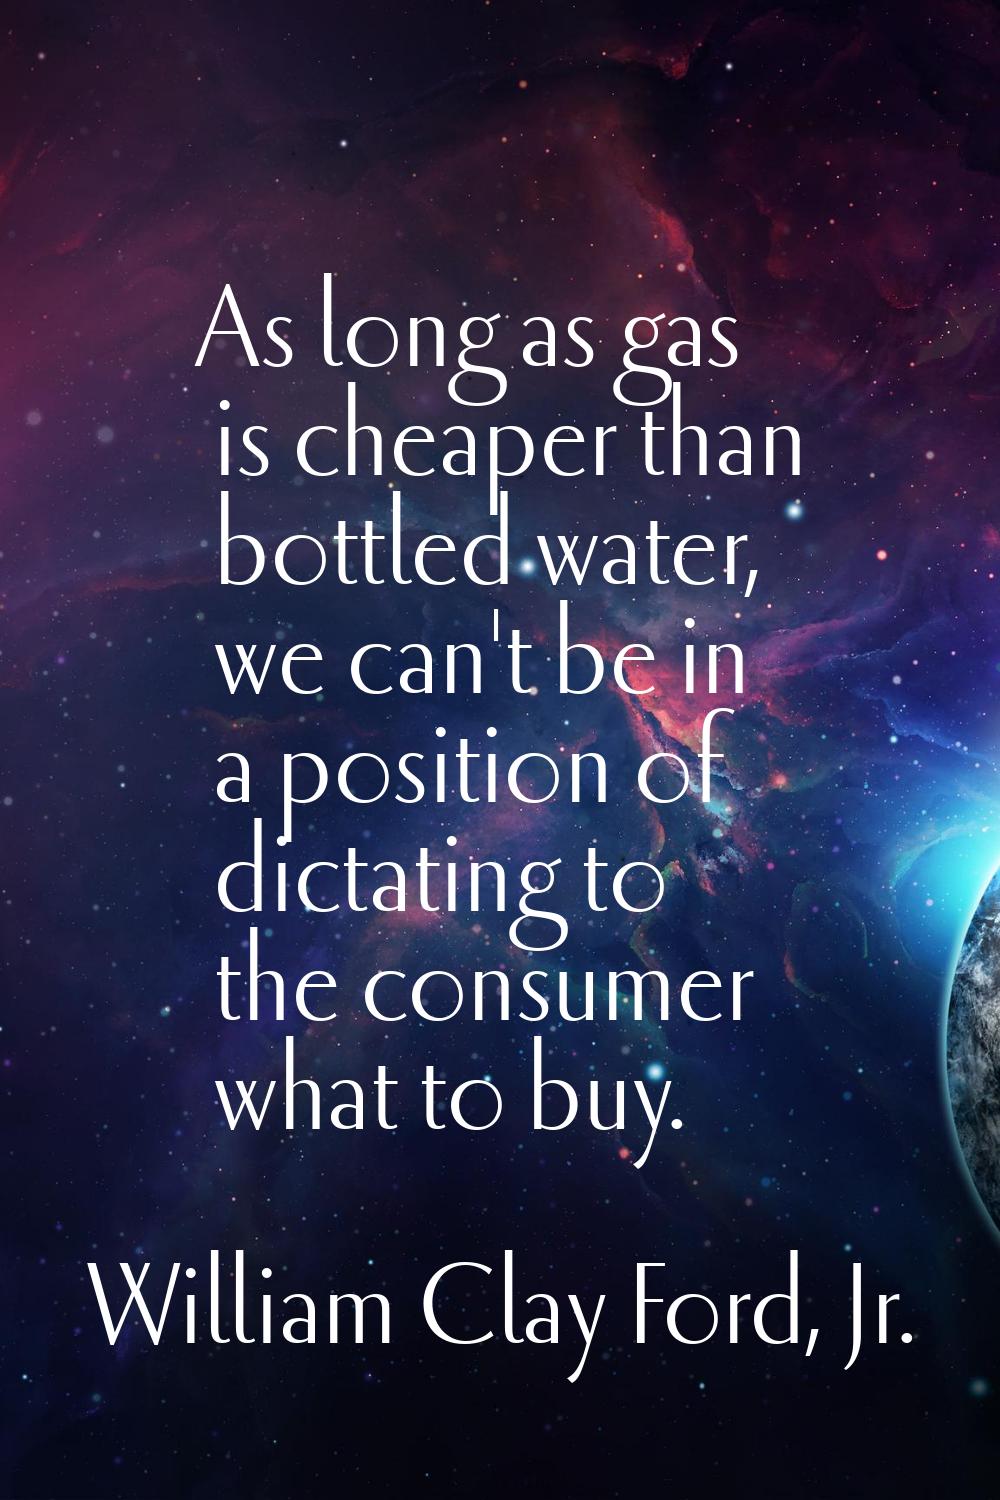 As long as gas is cheaper than bottled water, we can't be in a position of dictating to the consume